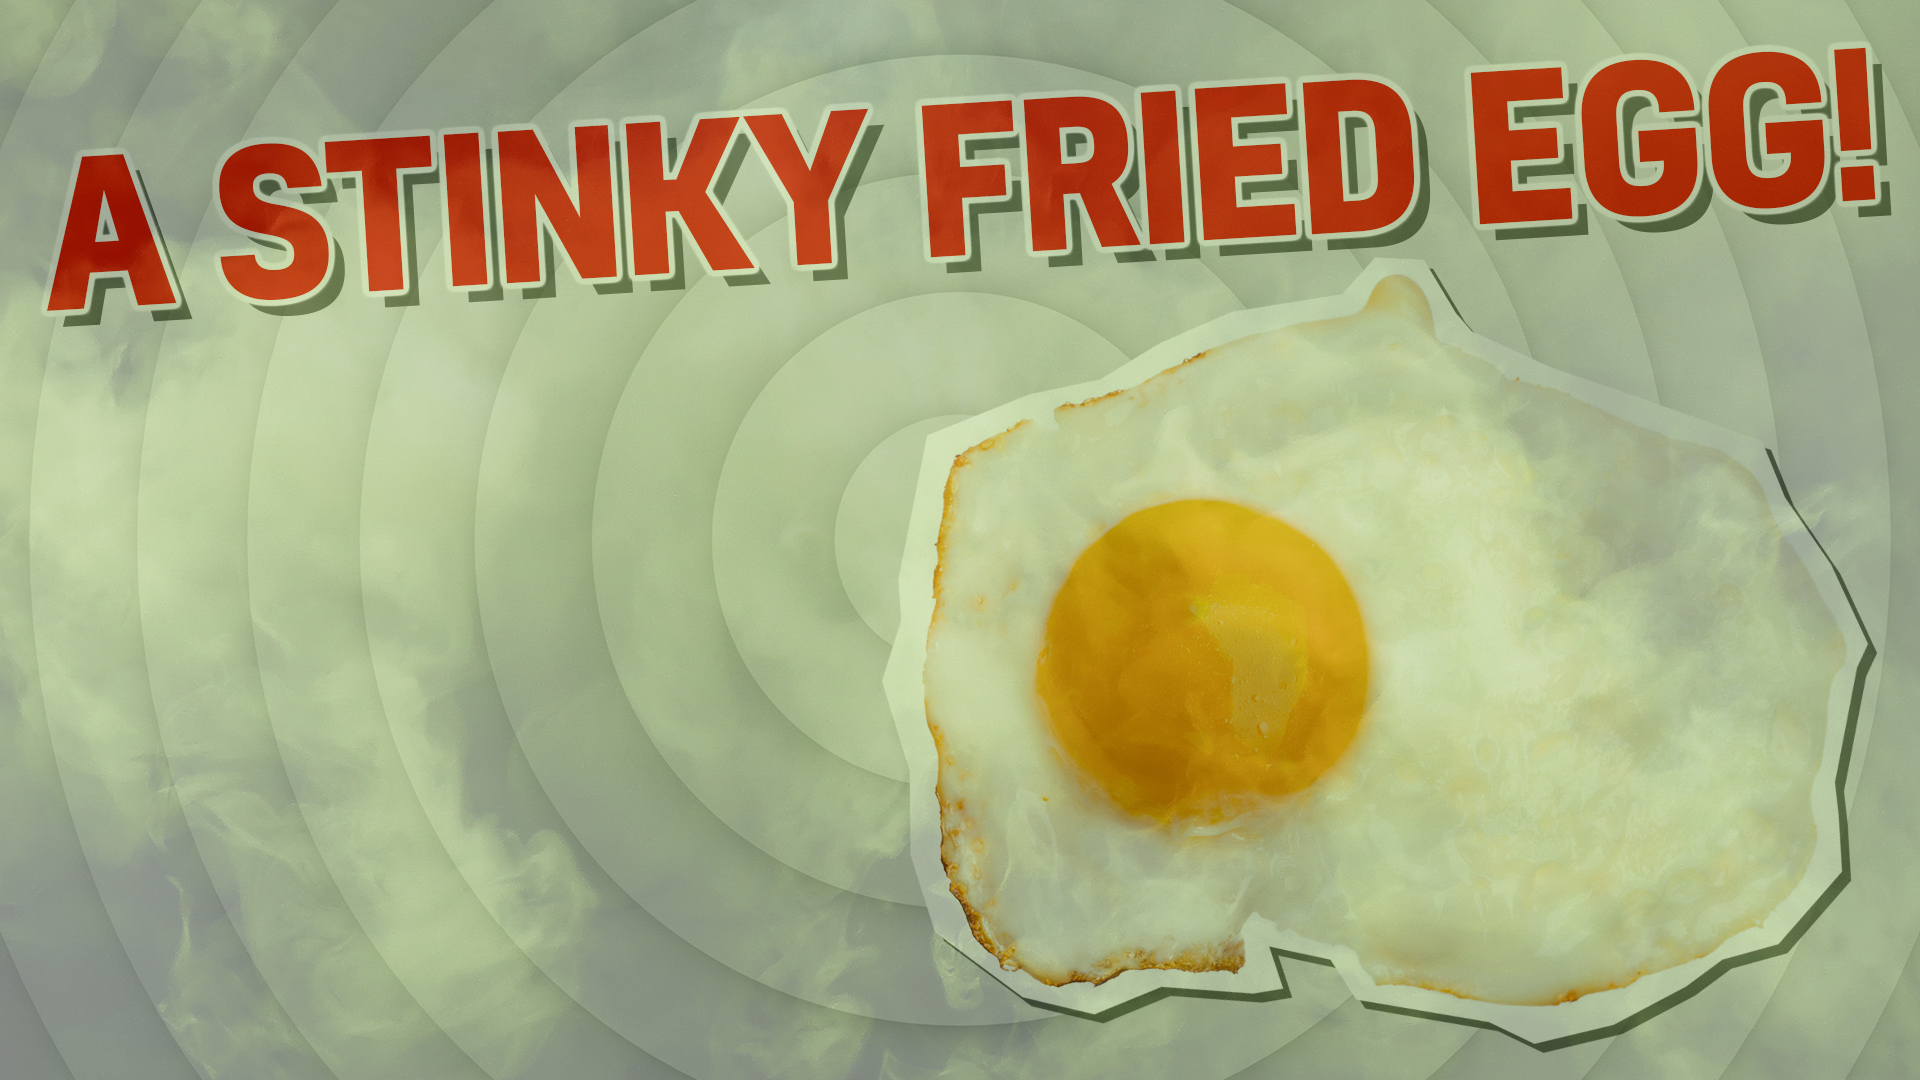 A pungent fried egg surrounded by stink